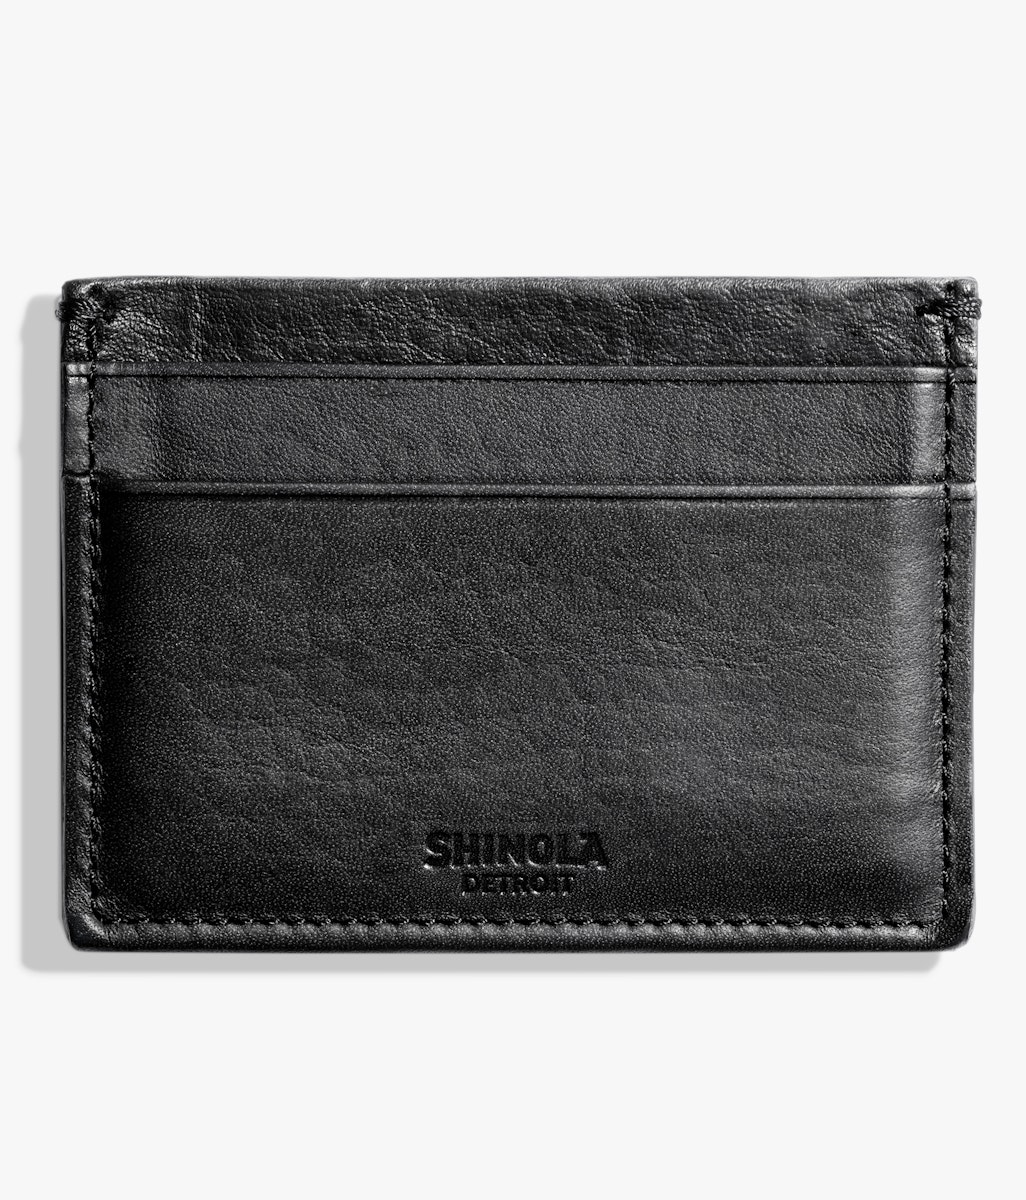 21SS/Leather Card Case/カードケース/レザー/BLK/S55UI0295 - 財布・小物